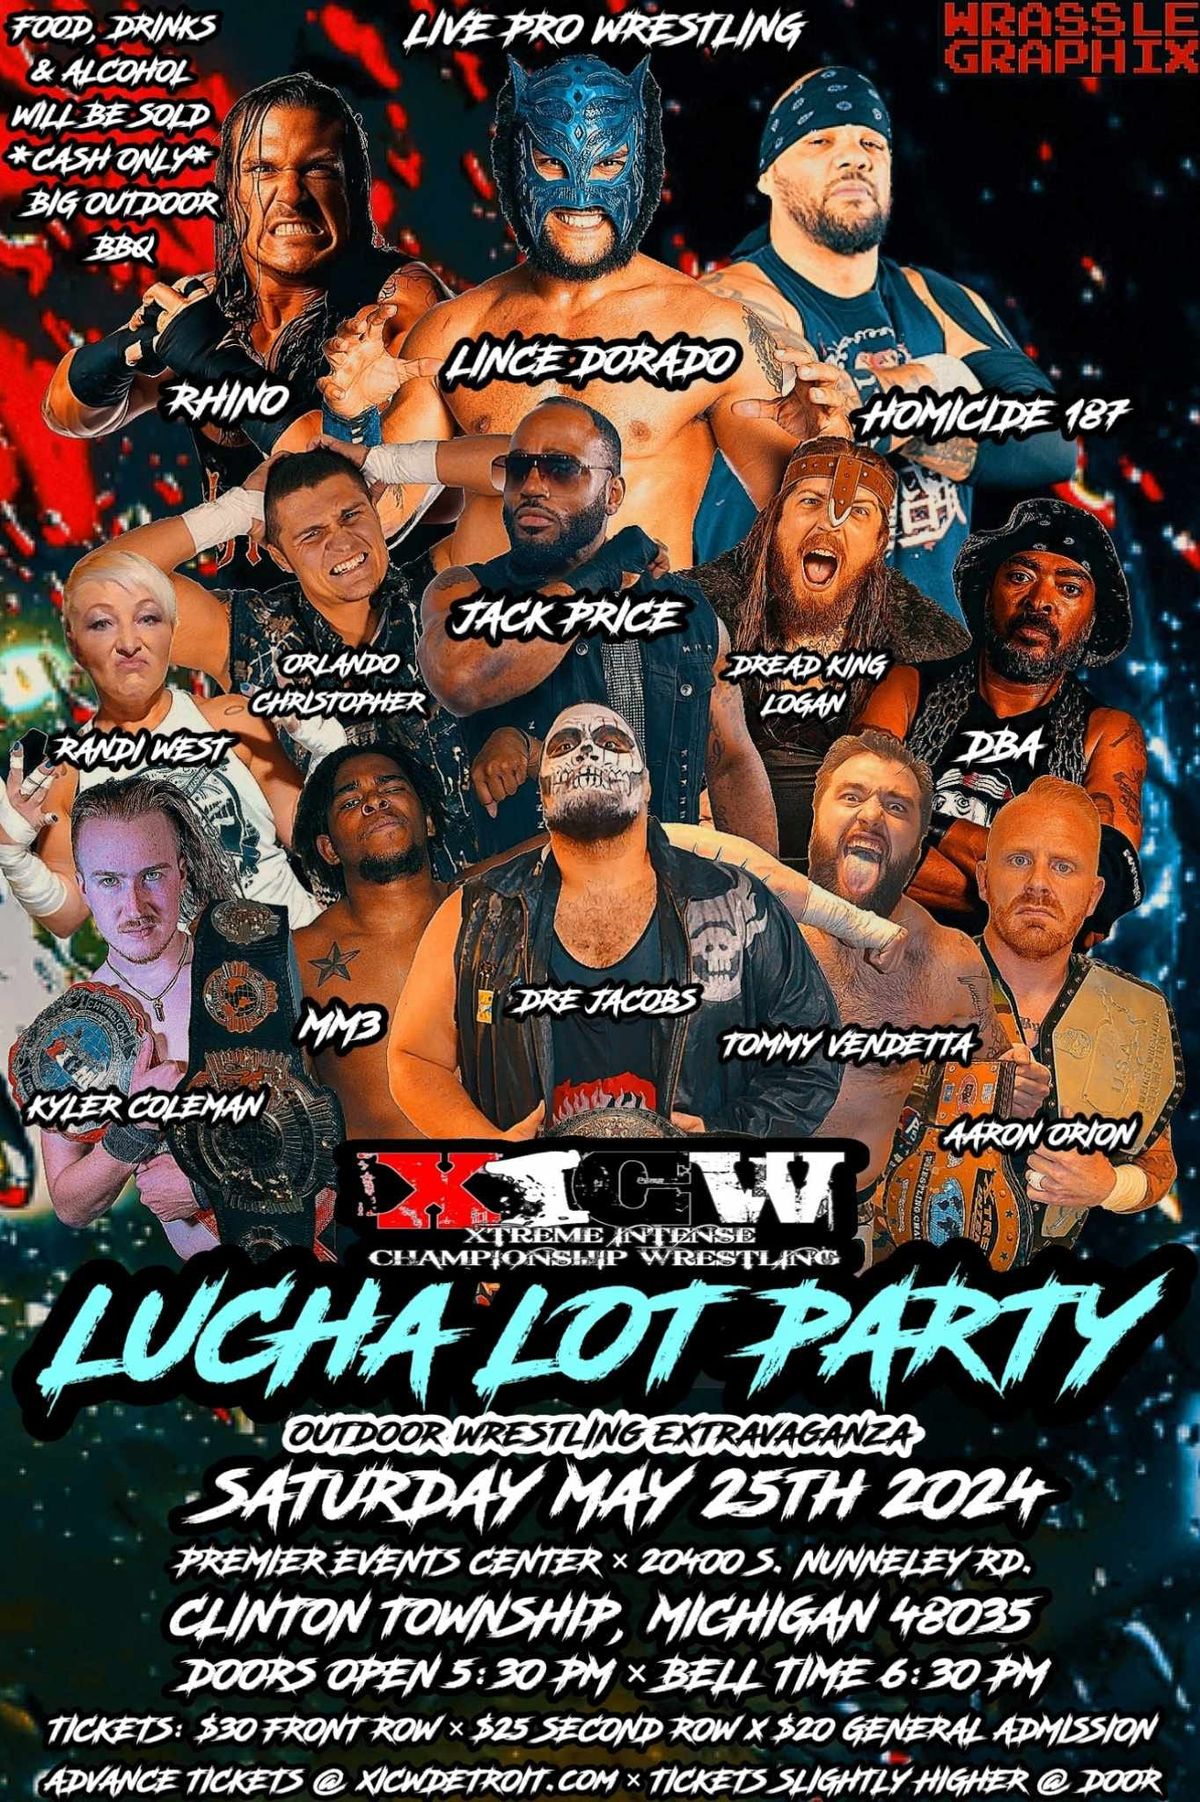 XICW presents Lucha Lot Party